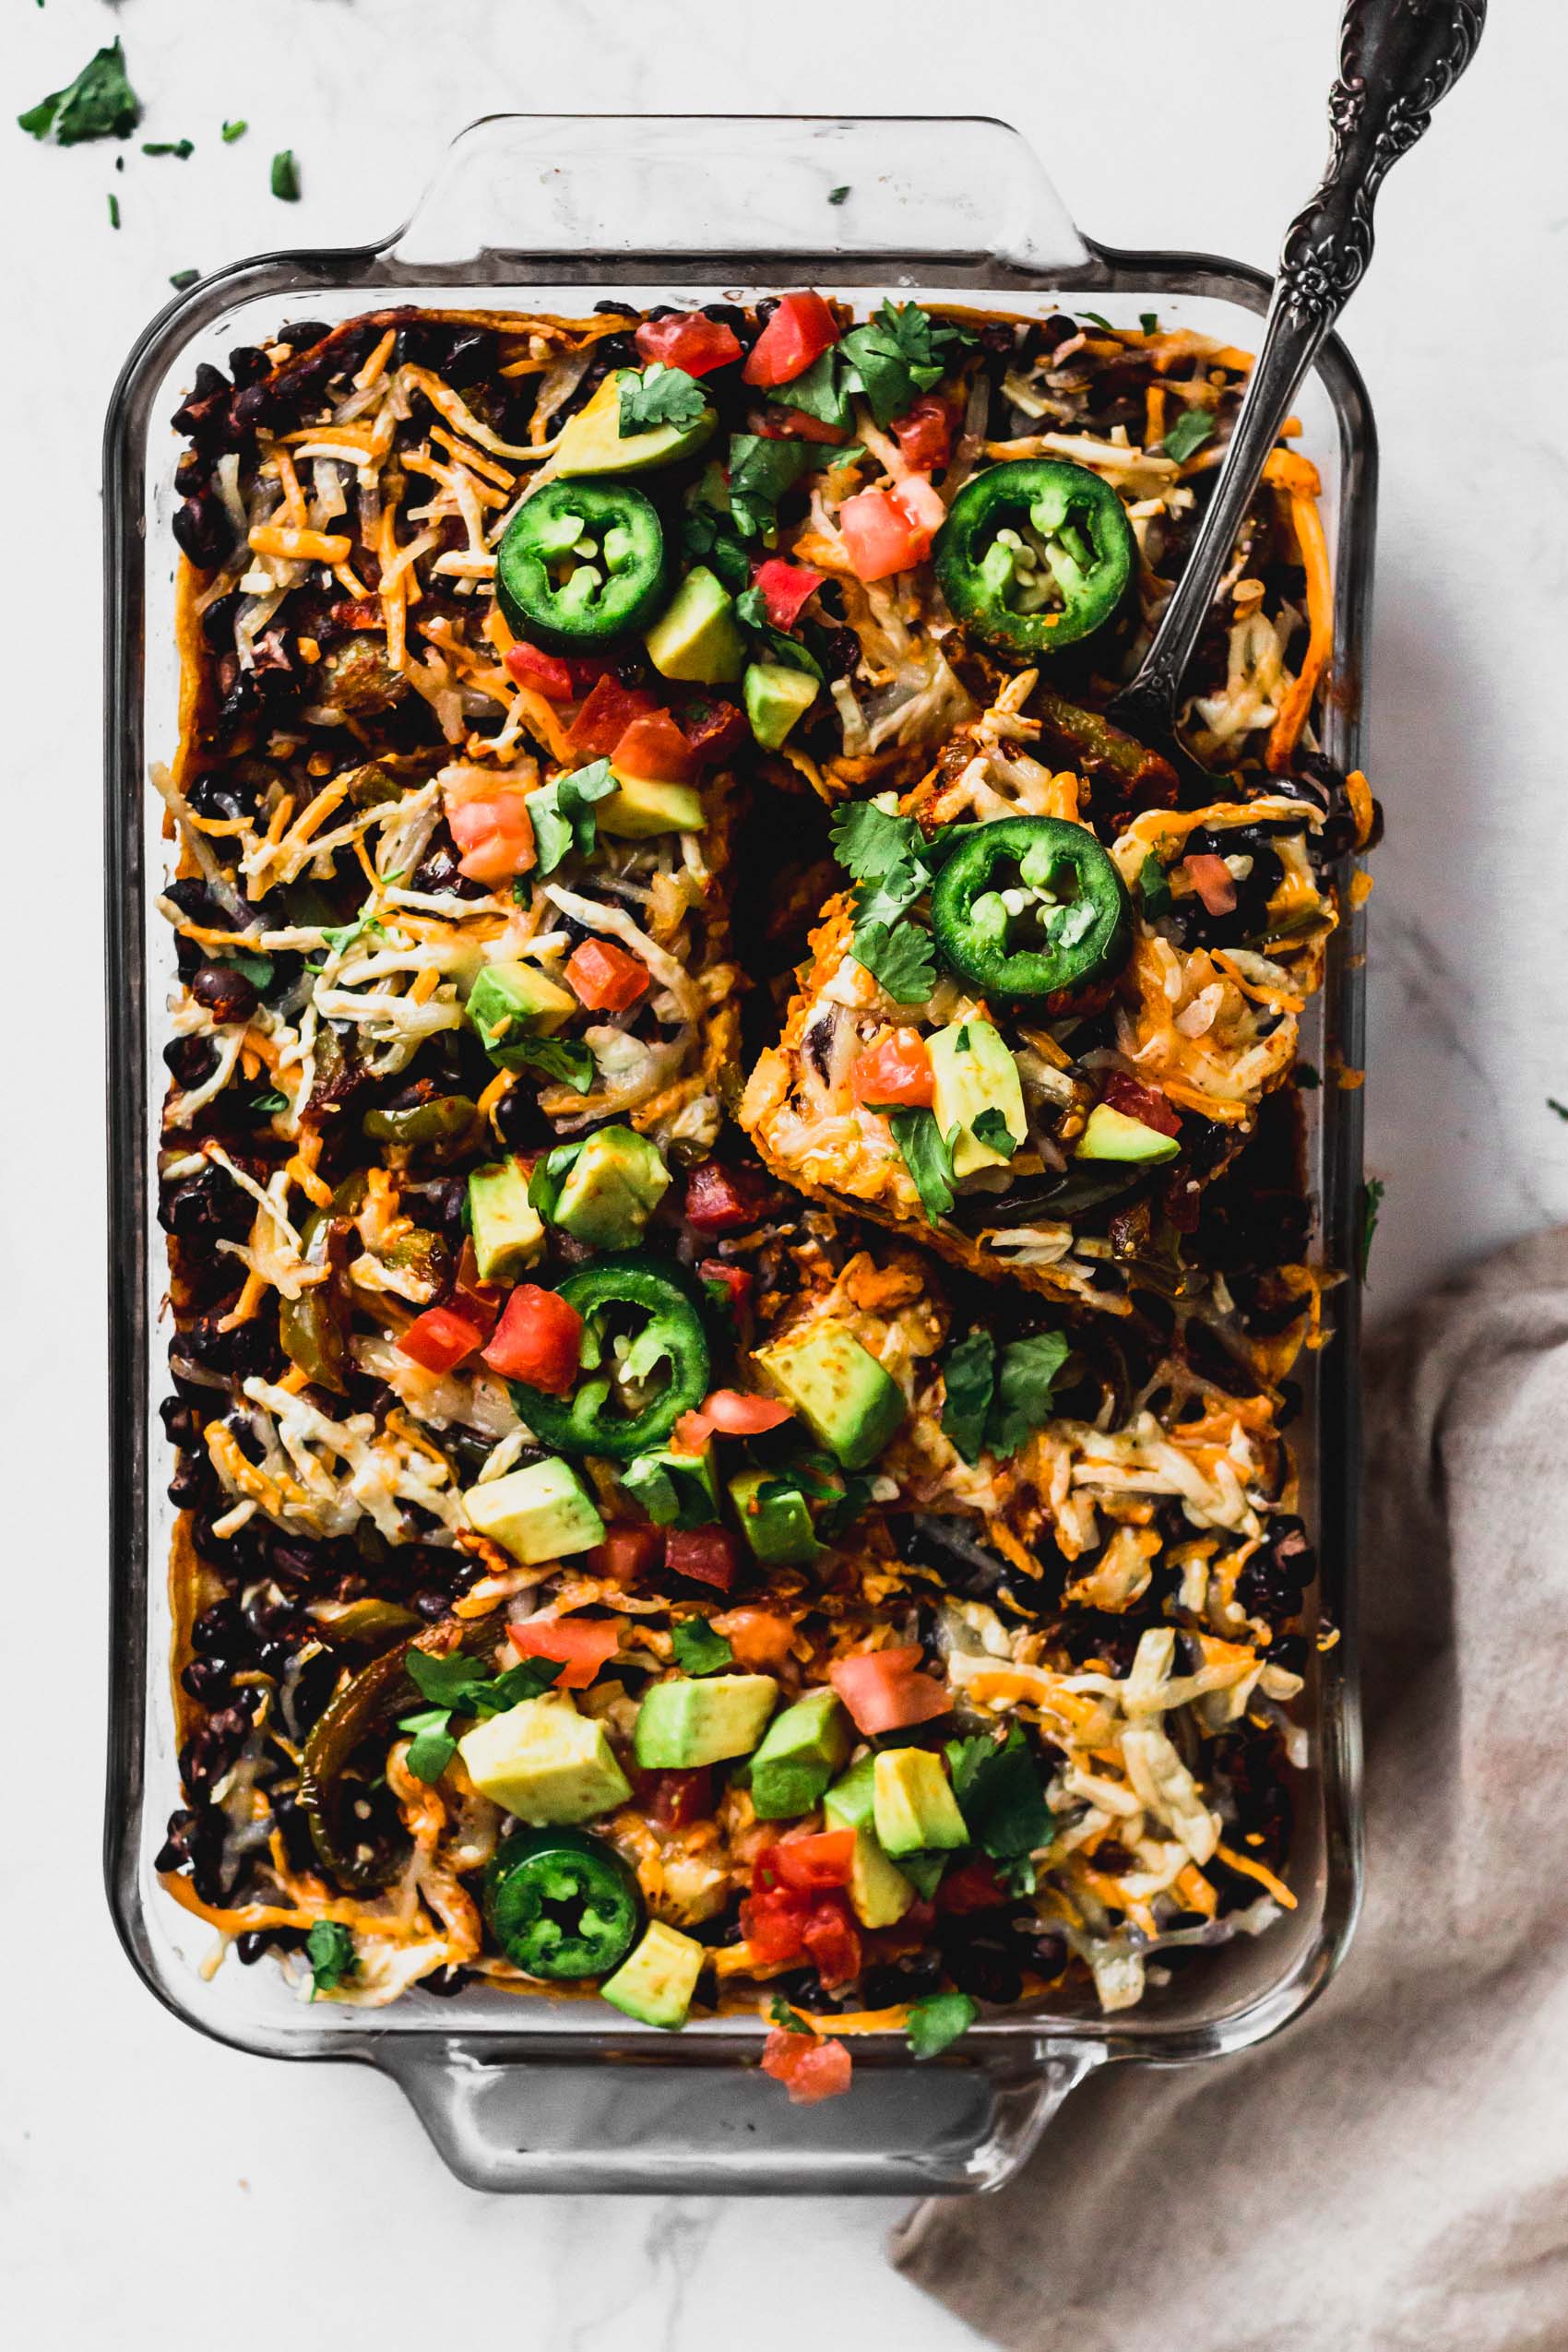 a casserole dish containing a black bean enchilada casserole topped with fresh avocado and jalapeno slices